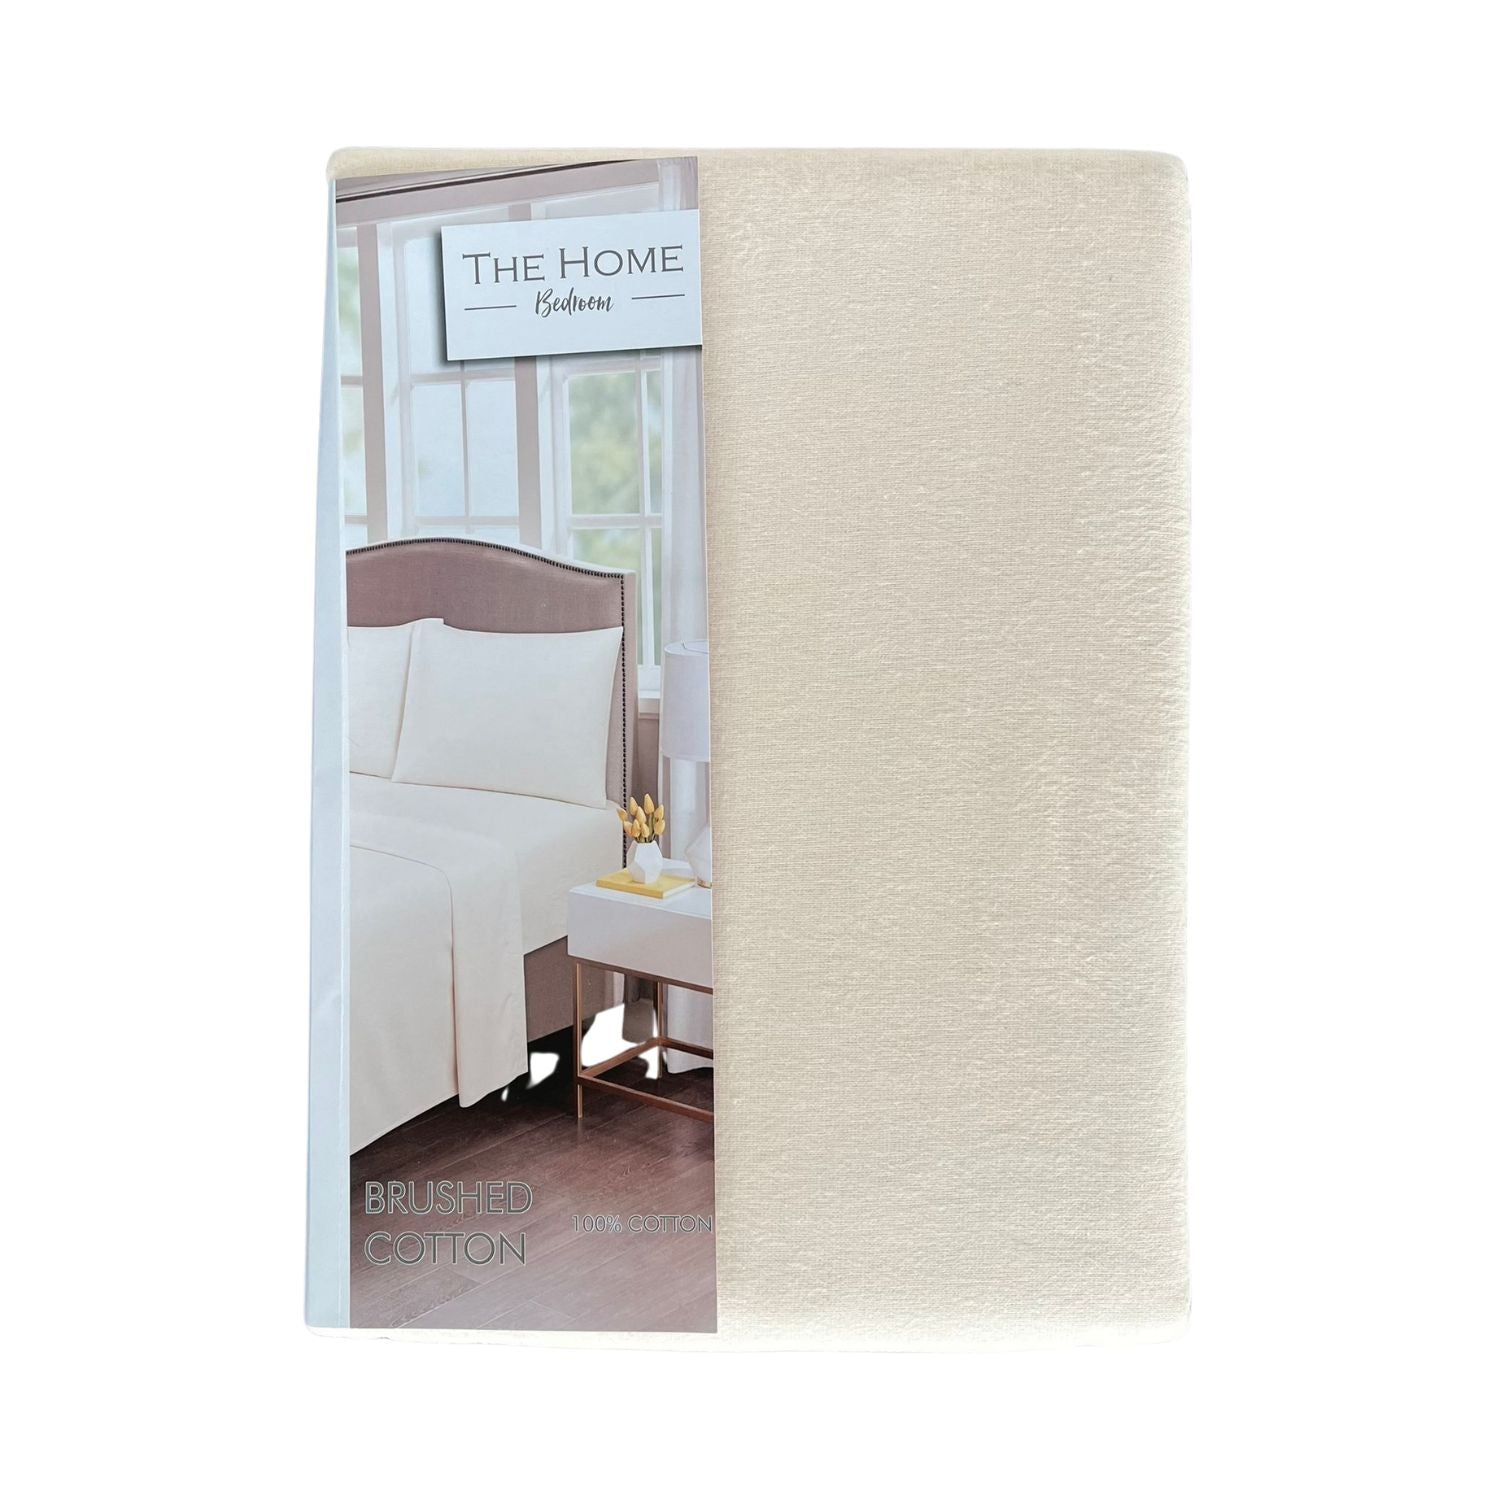 The Home Bedroom Flannel Sheet Set - Cream 1 Shaws Department Stores